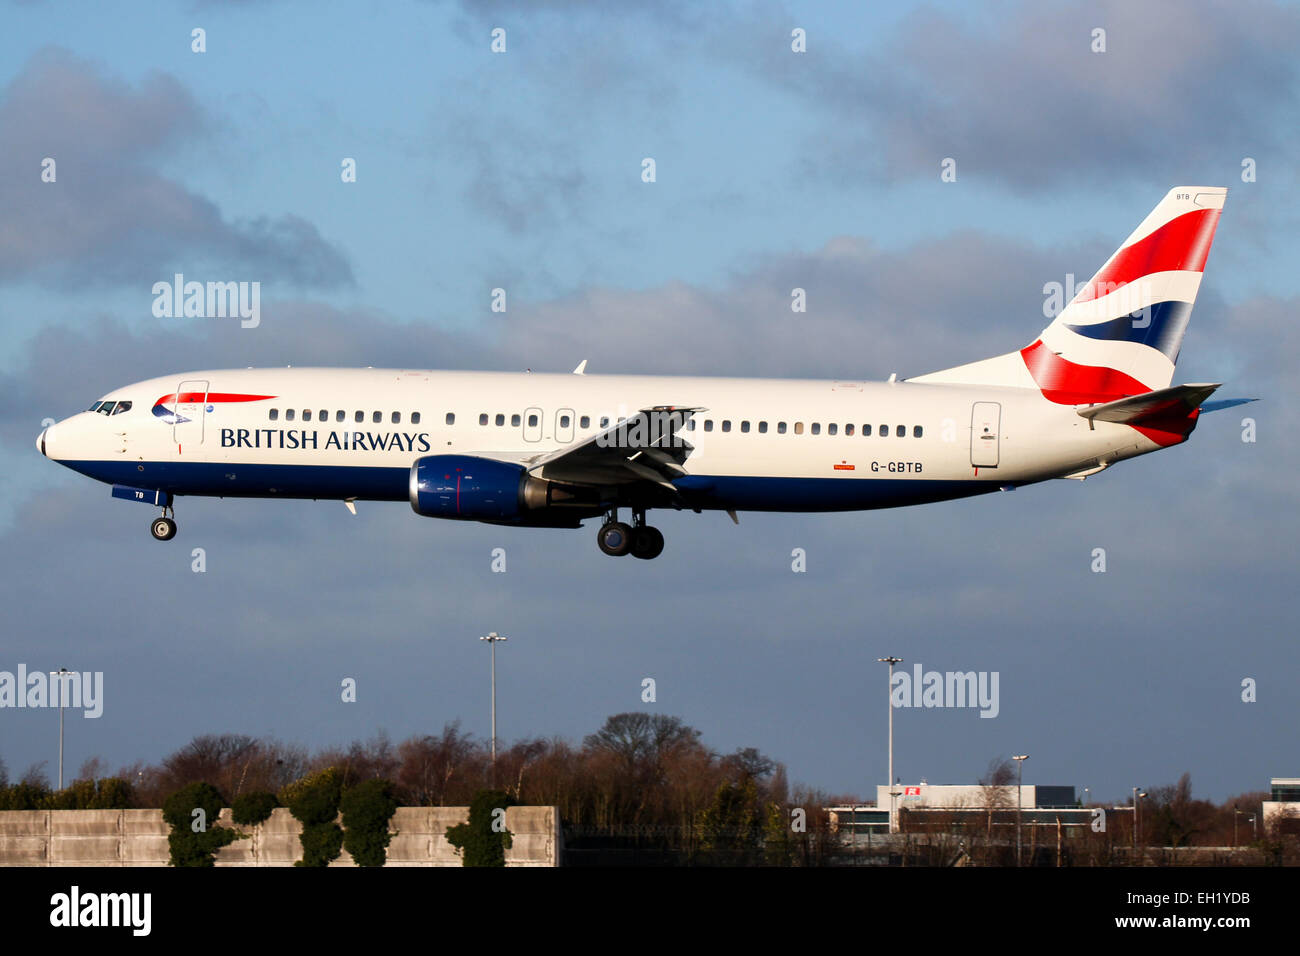 British Airways Boeing 737-400 approaches runway 23R at Manchester airport. Stock Photo